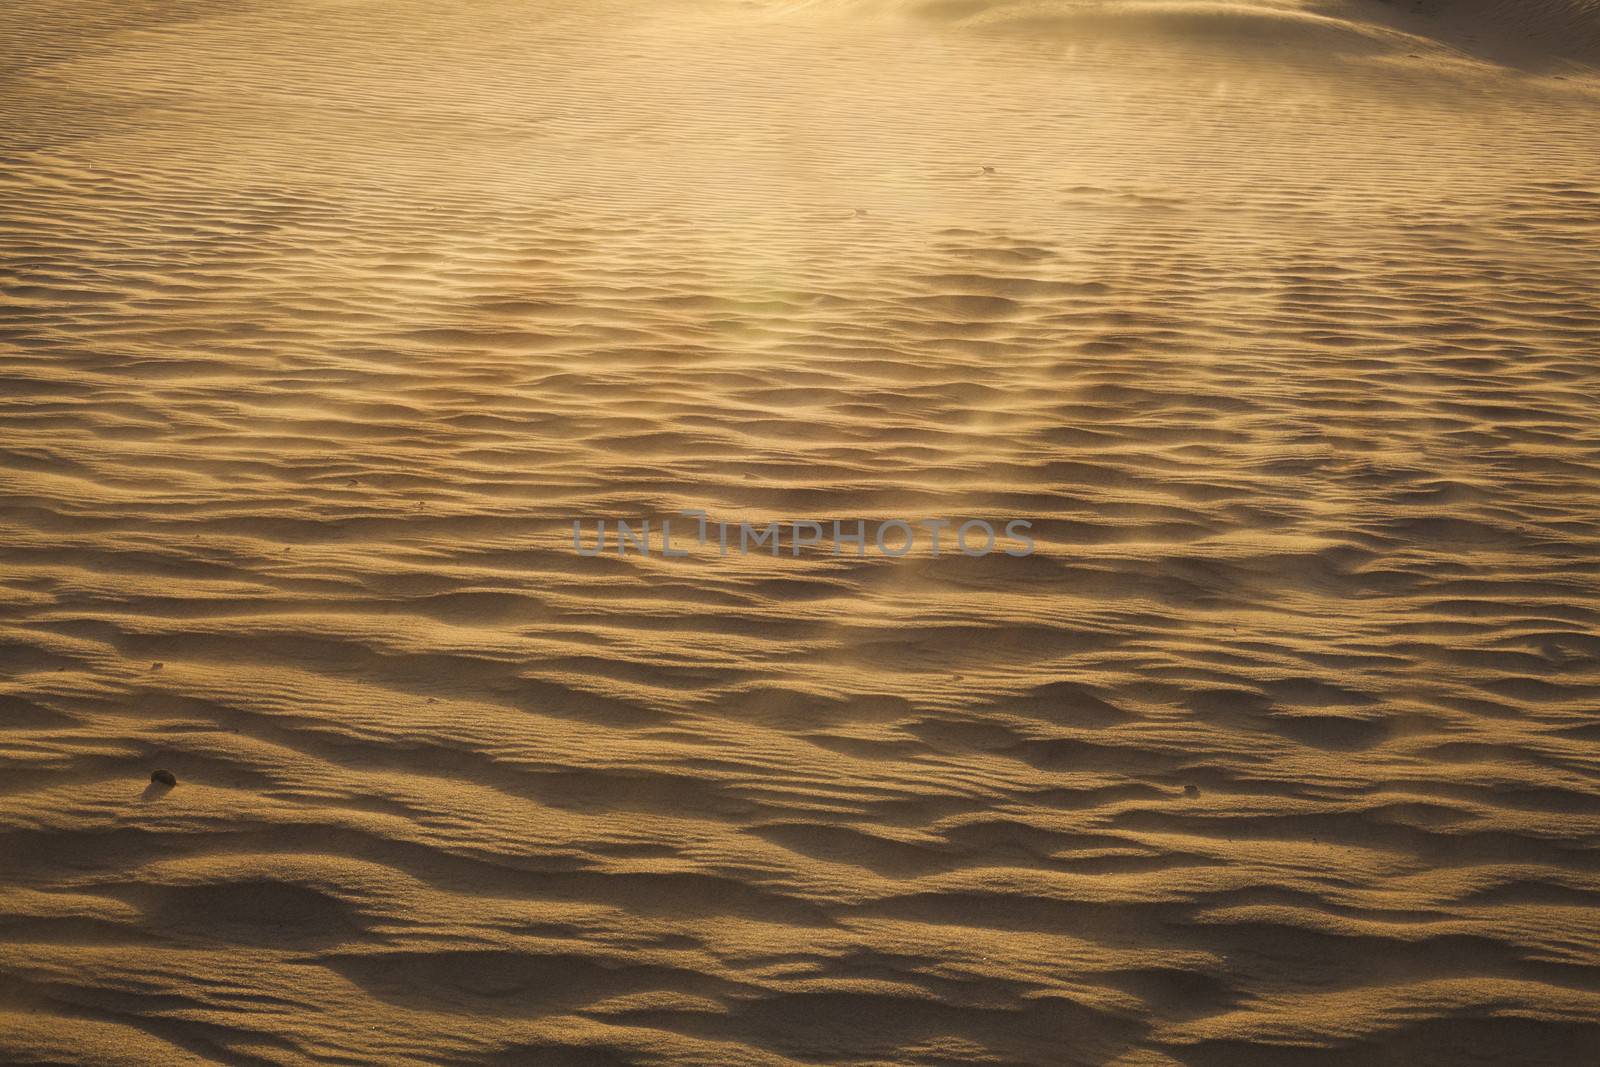 Landscape shot of the desert and the wind pattern on the sand, full frame by XiXinXing